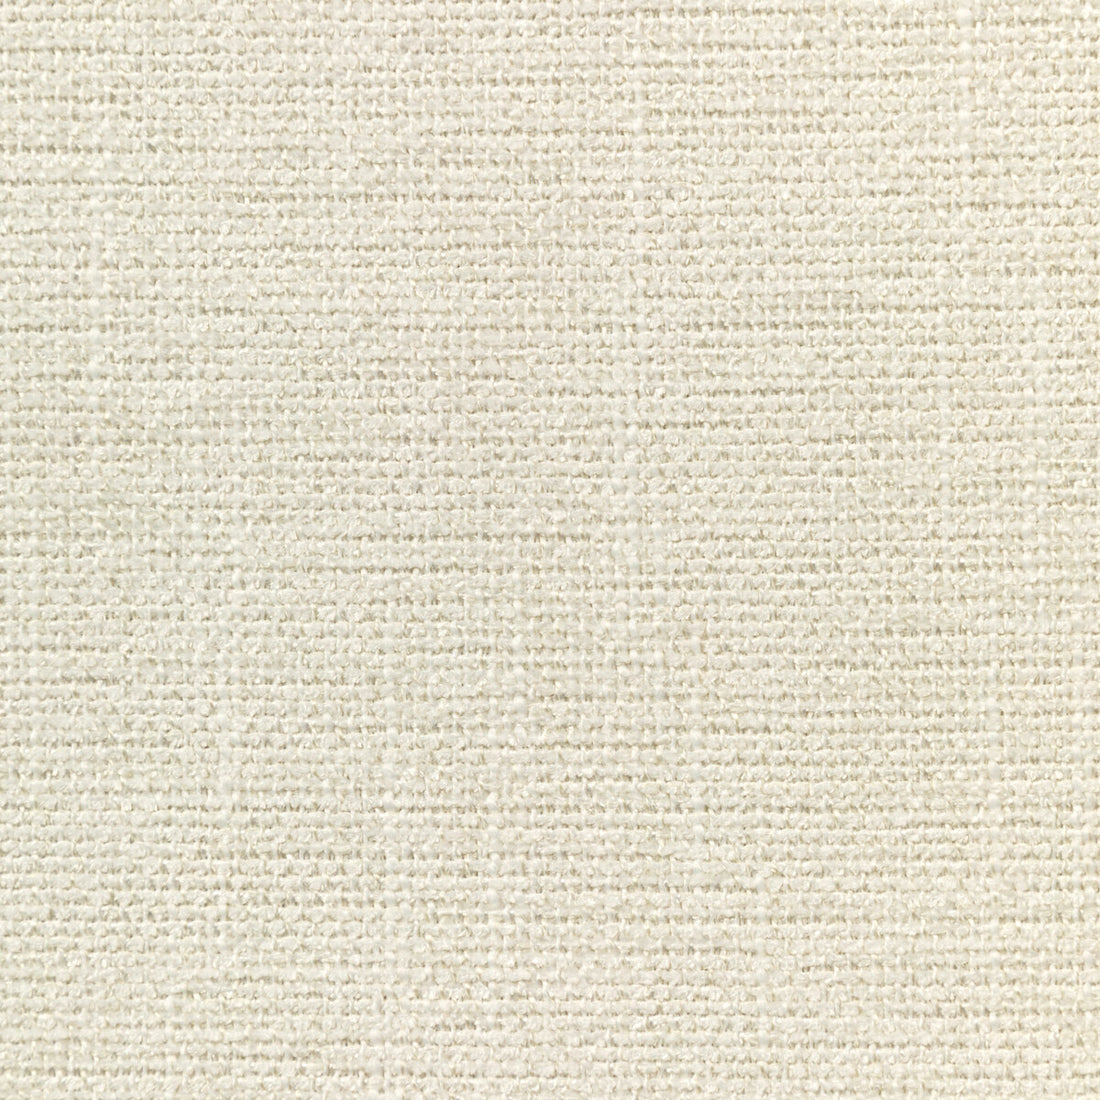 Kravet Smart fabric in 35973-101 color - pattern 35973.101.0 - by Kravet Smart in the Performance Crypton Home collection